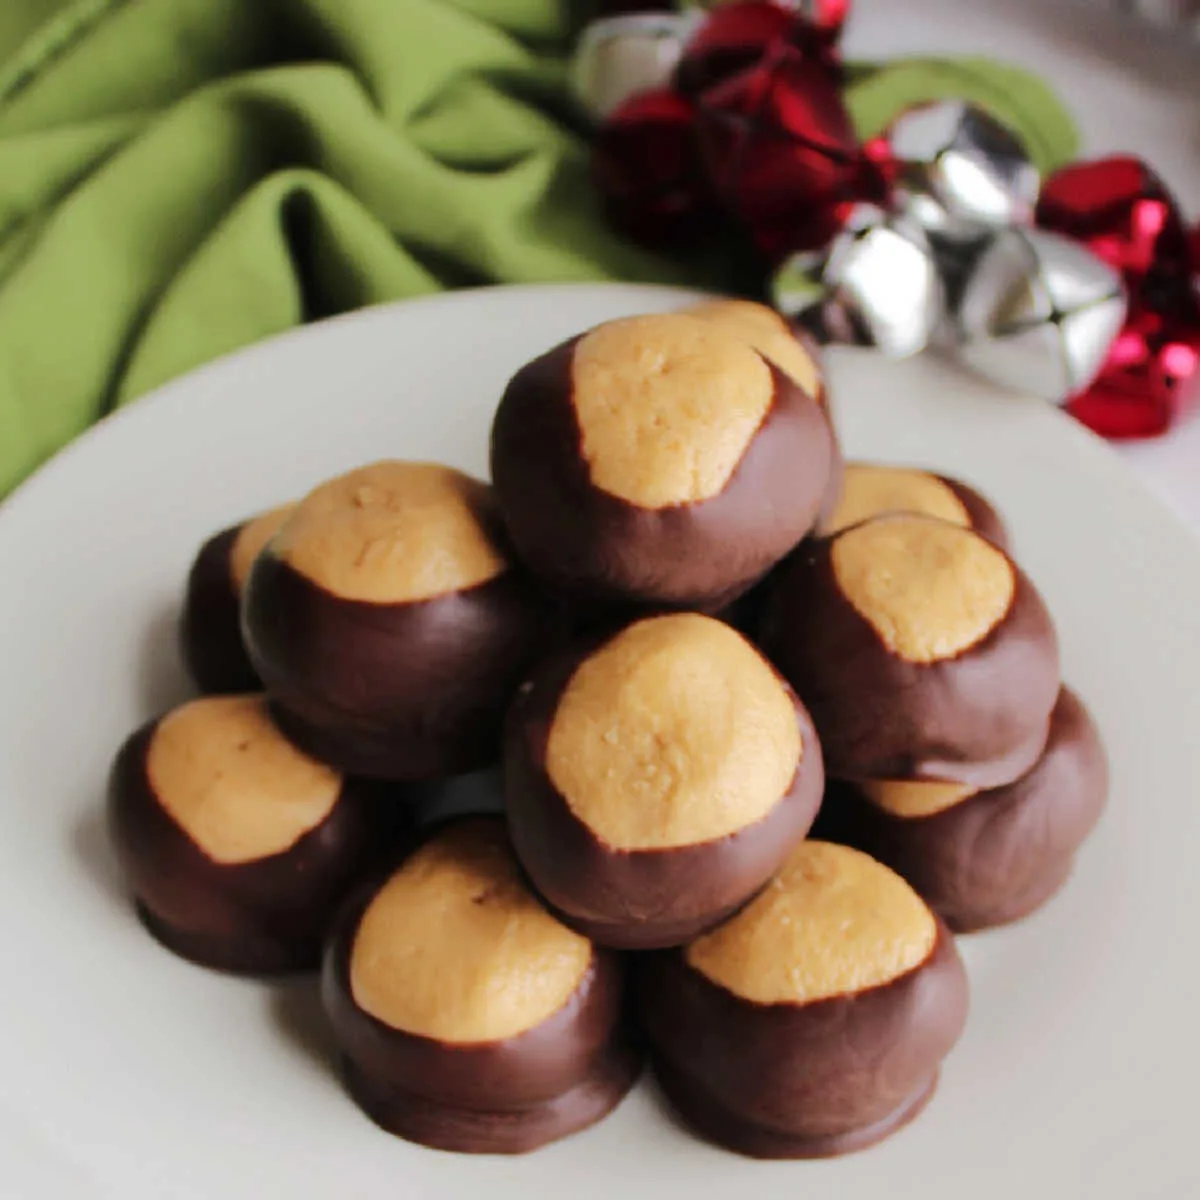 Pile of buckeyes on plate showing creamy peanut butter center showing through chocolate shell.